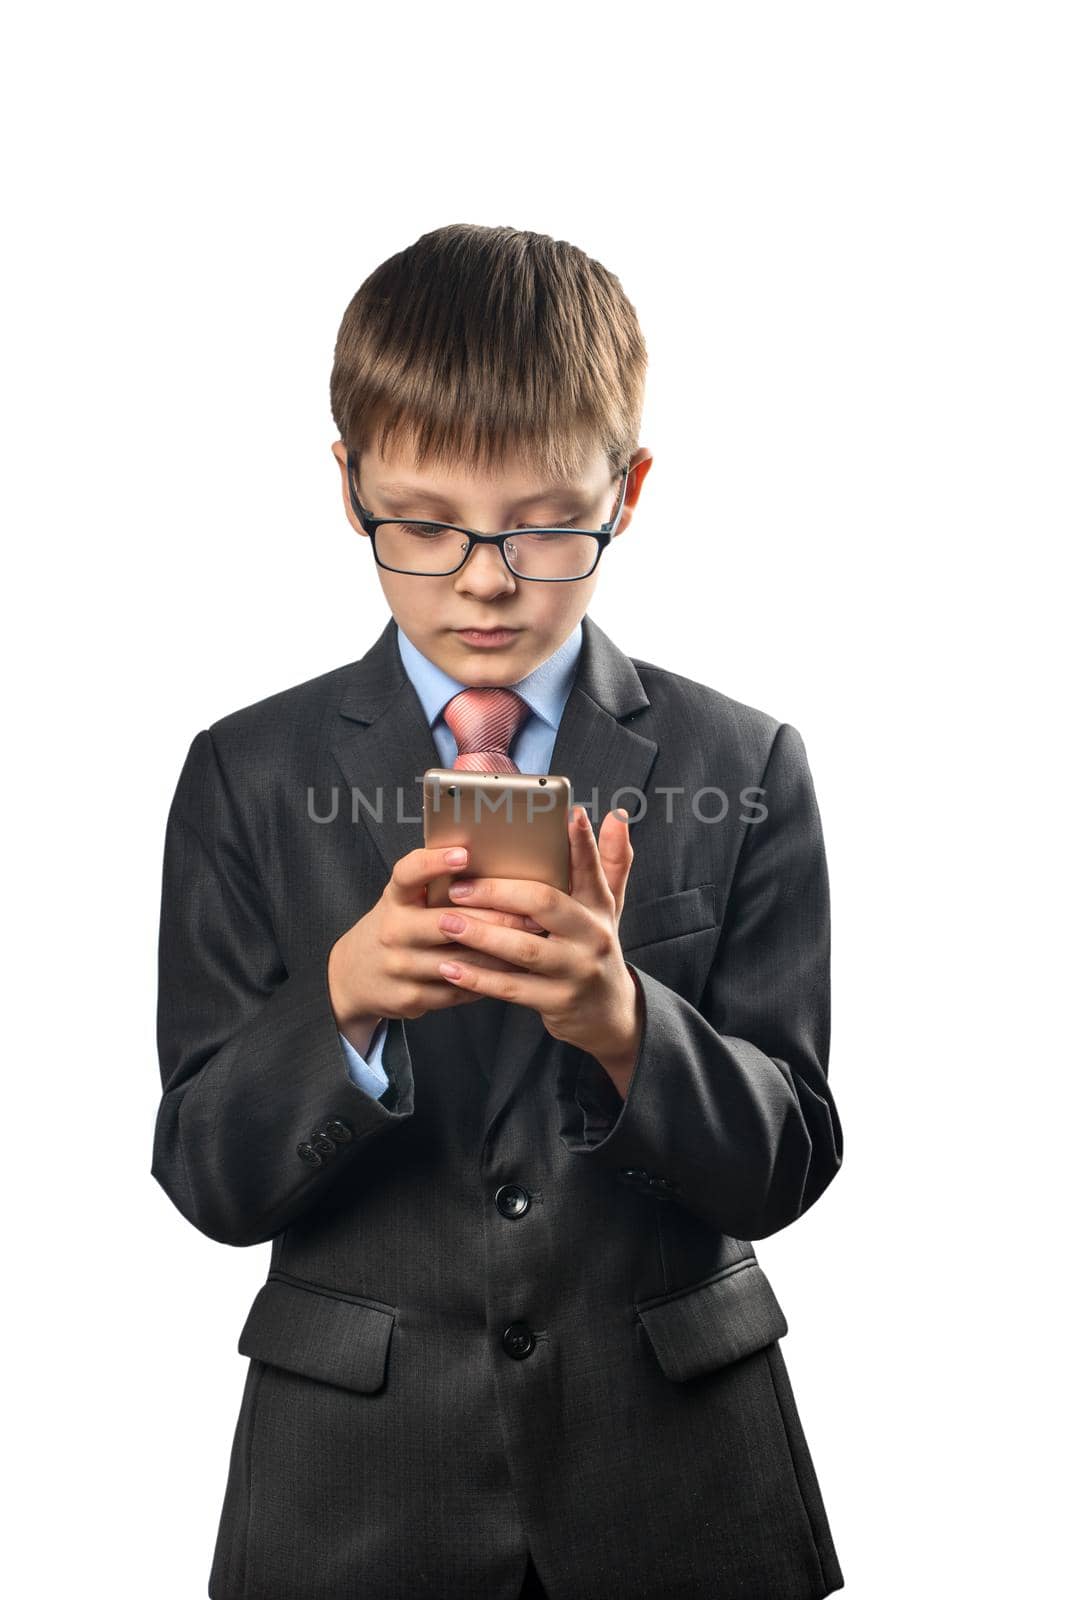 Schoolboy wearing glasses playing on phone on white background